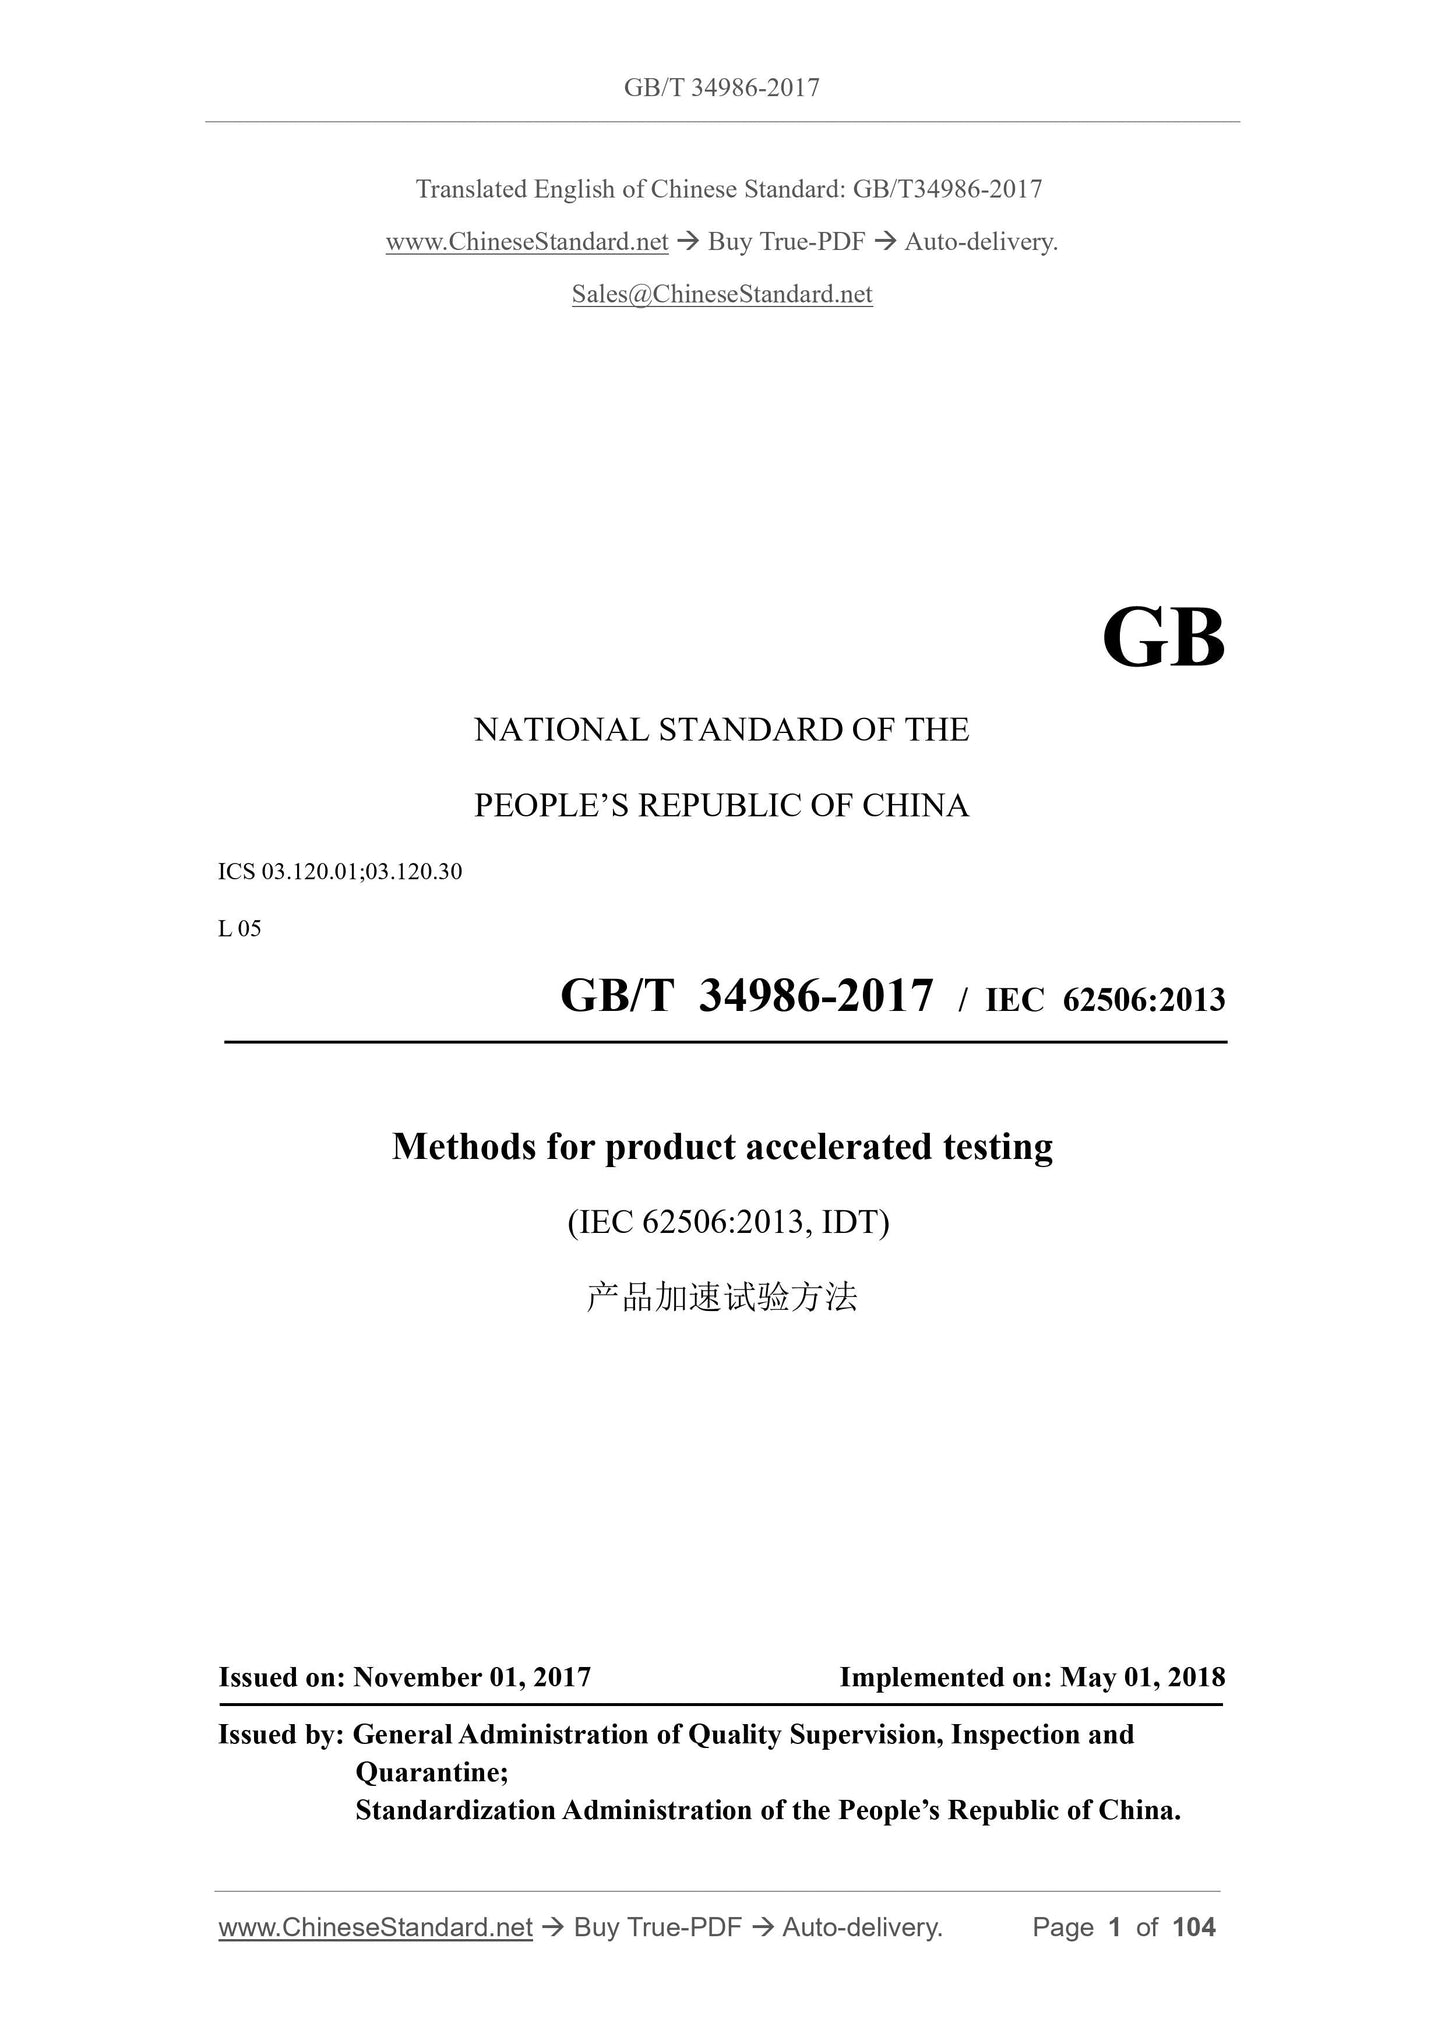 GB/T 34986-2017 Page 1